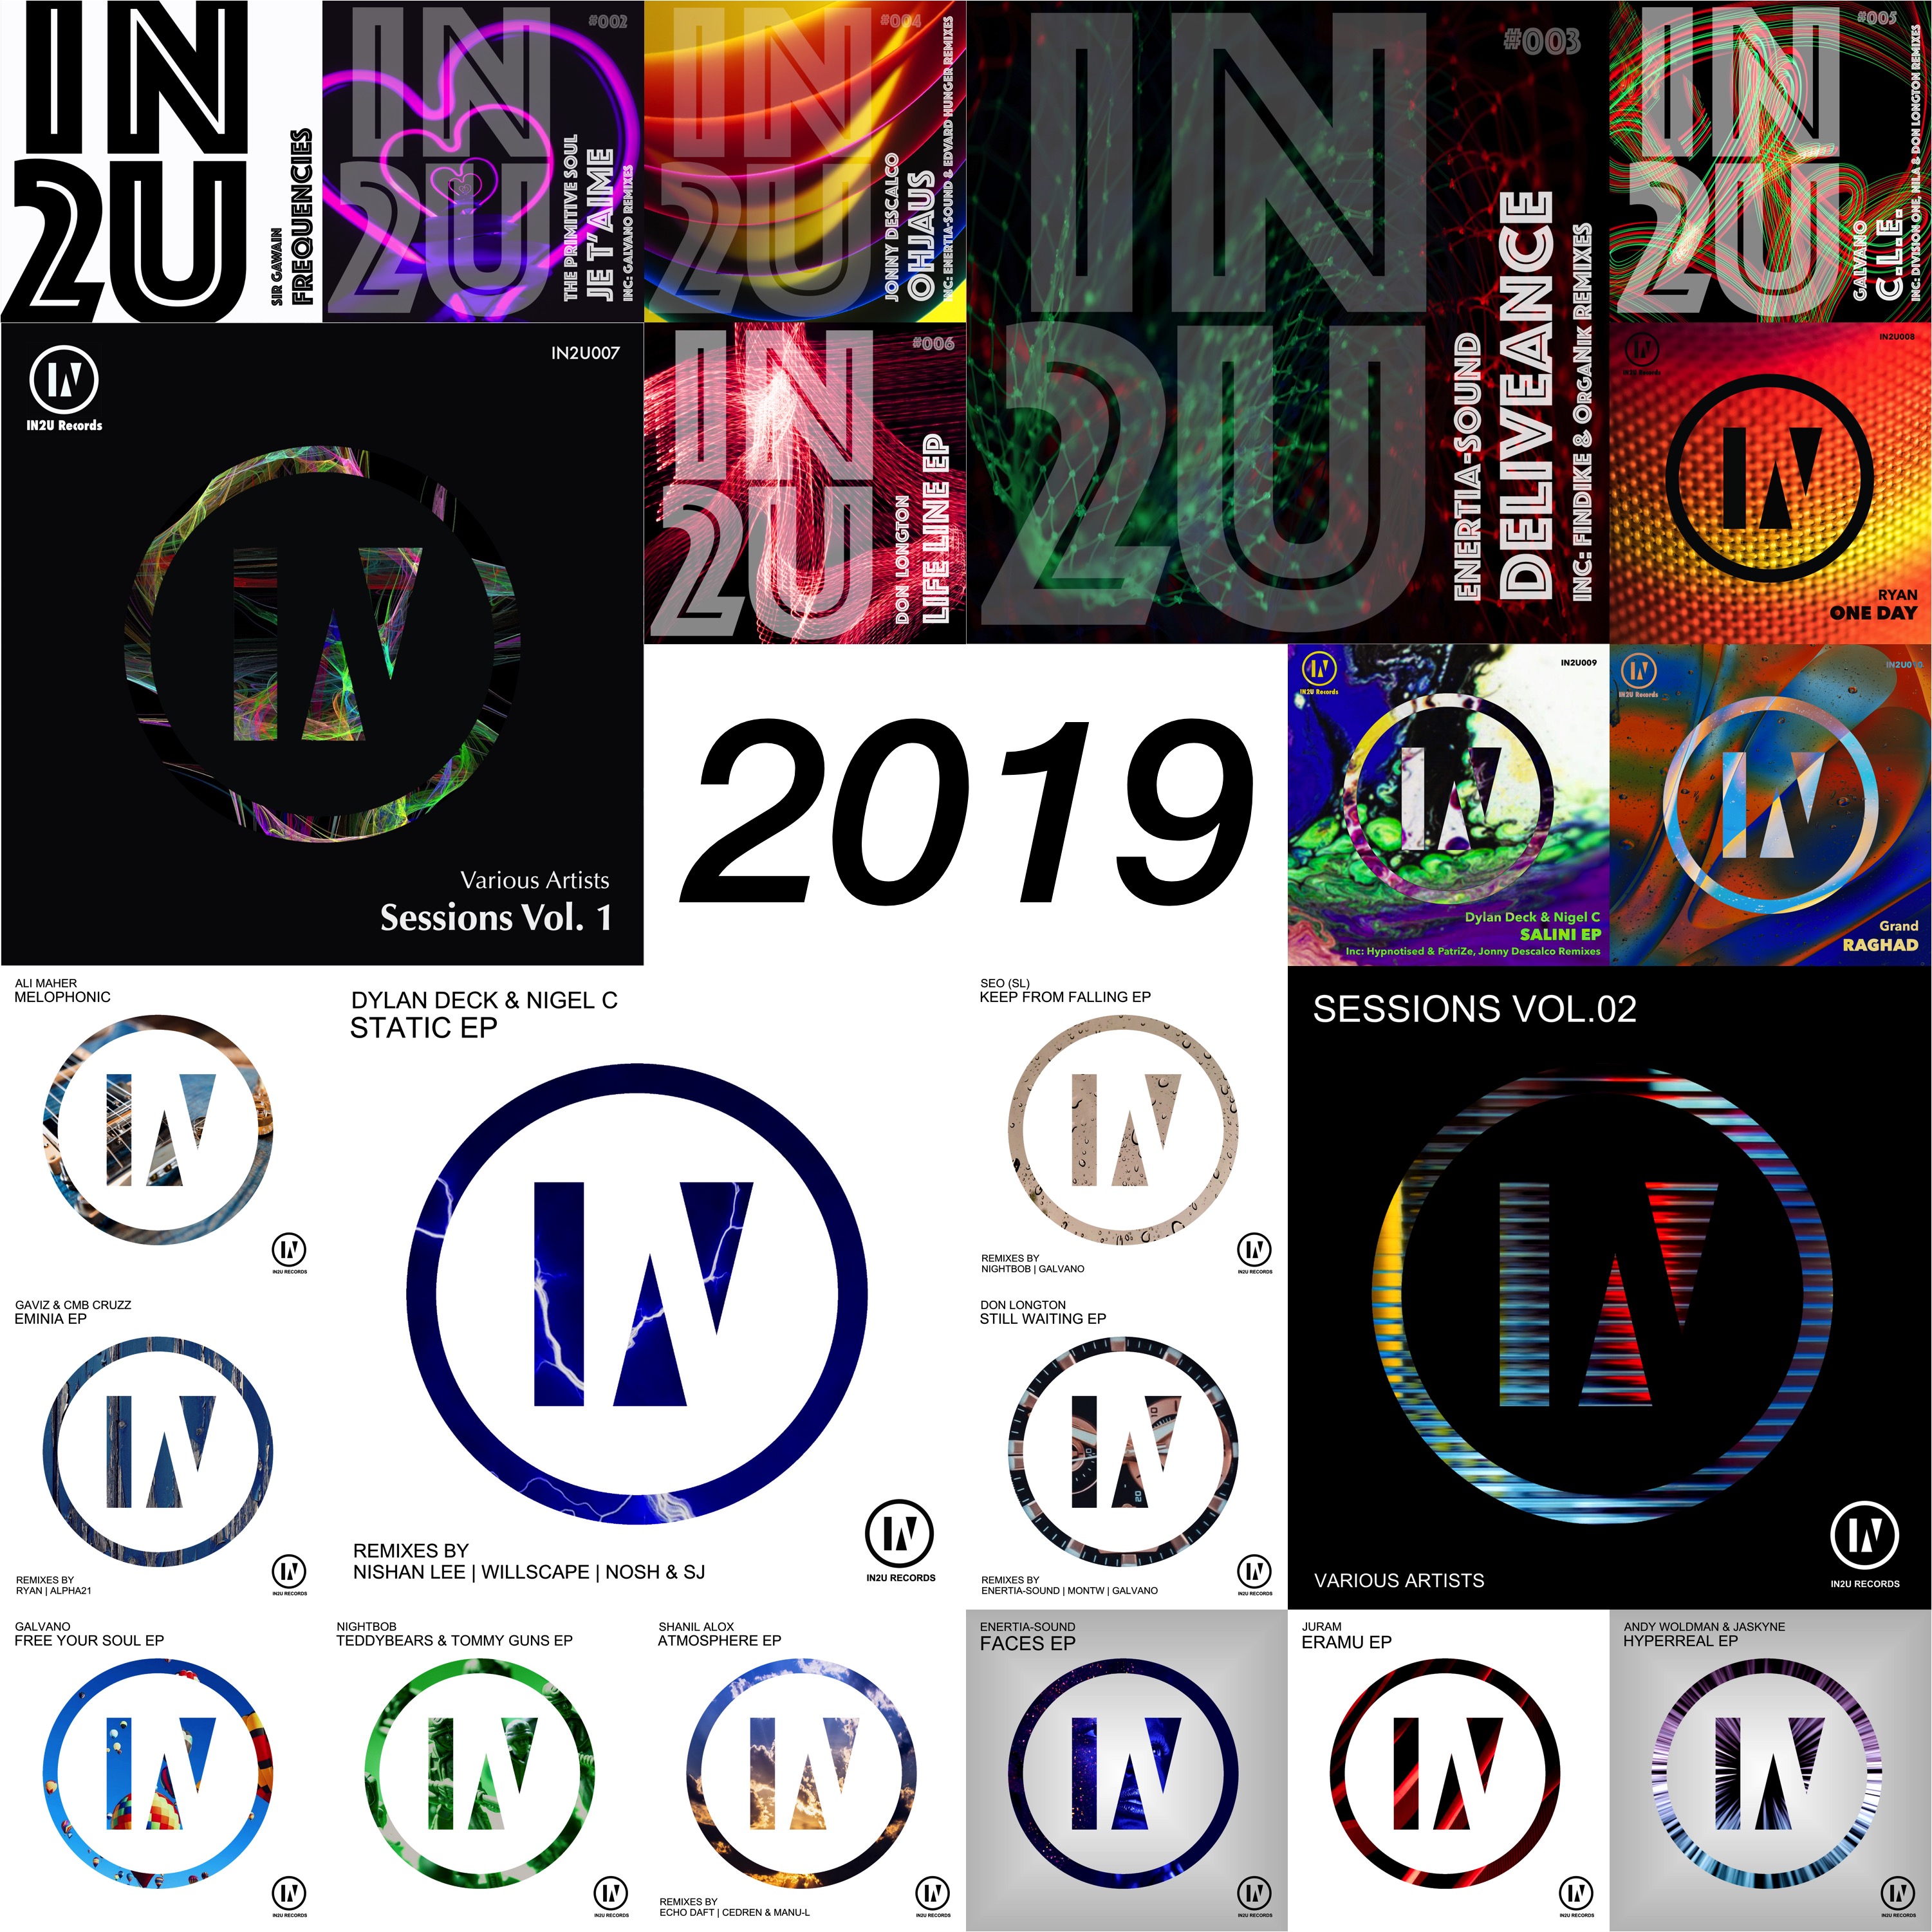 INU Residents Sessions :: | 037 | Galvano - IN2U 2019 SPECIAL (aired on December 29th, 2019) banner logo